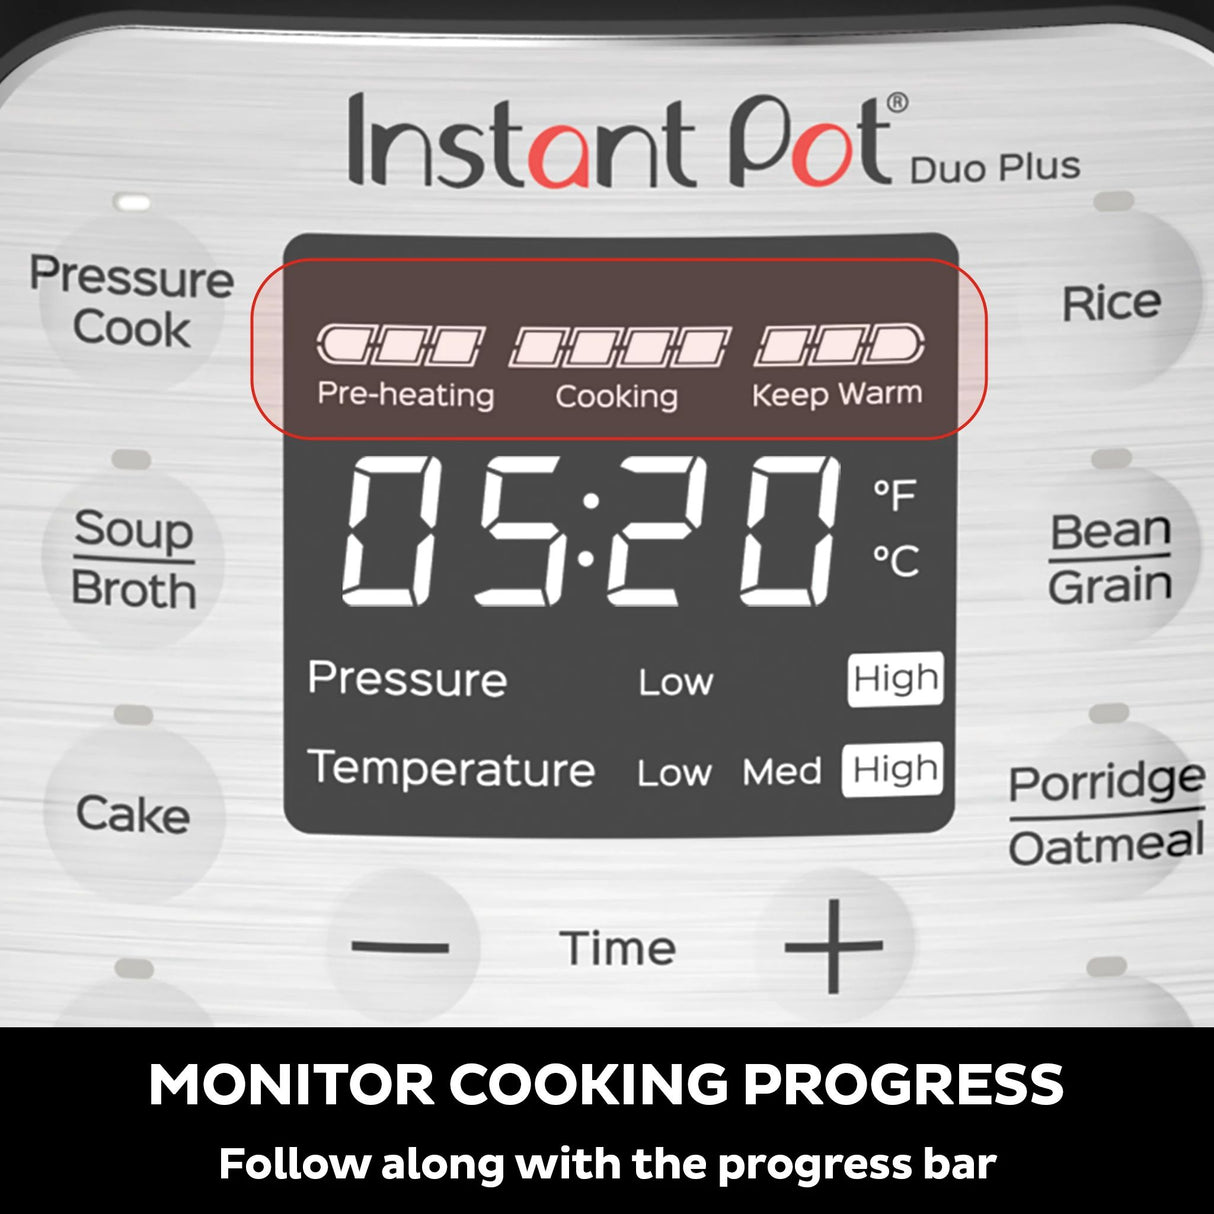  Instant Pot® Duo™ Plus 3-quart Mini Multi-Use Pressure Cooker with text monitor cooking progress, follow along with progress bar